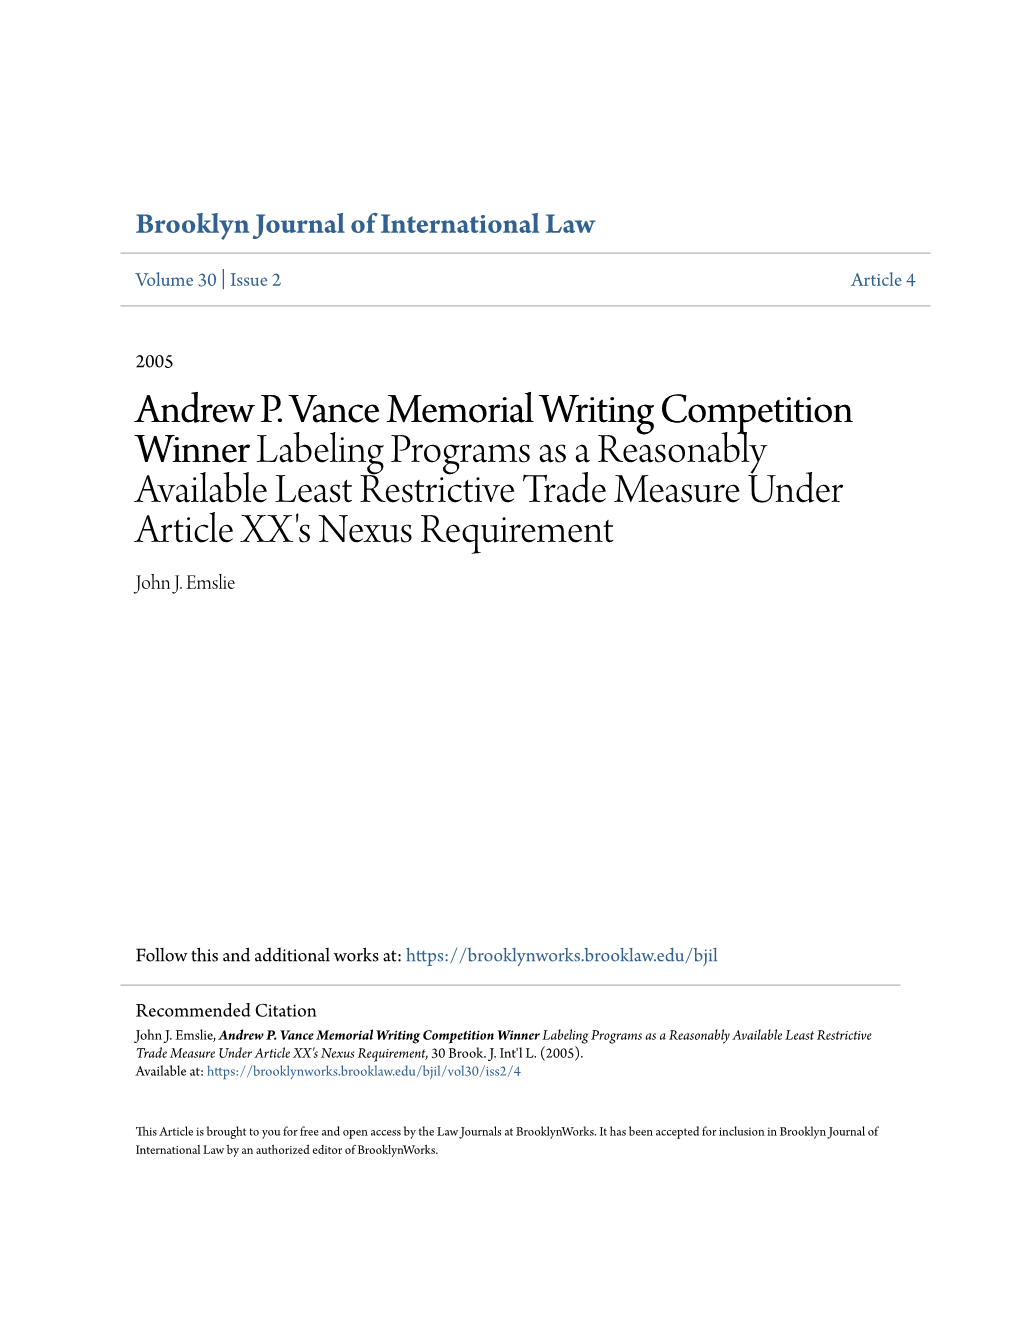 Andrew P. Vance Memorial Writing Competition Winner Labeling Programs As a Reasonably Available Least Restrictive Trade Measure